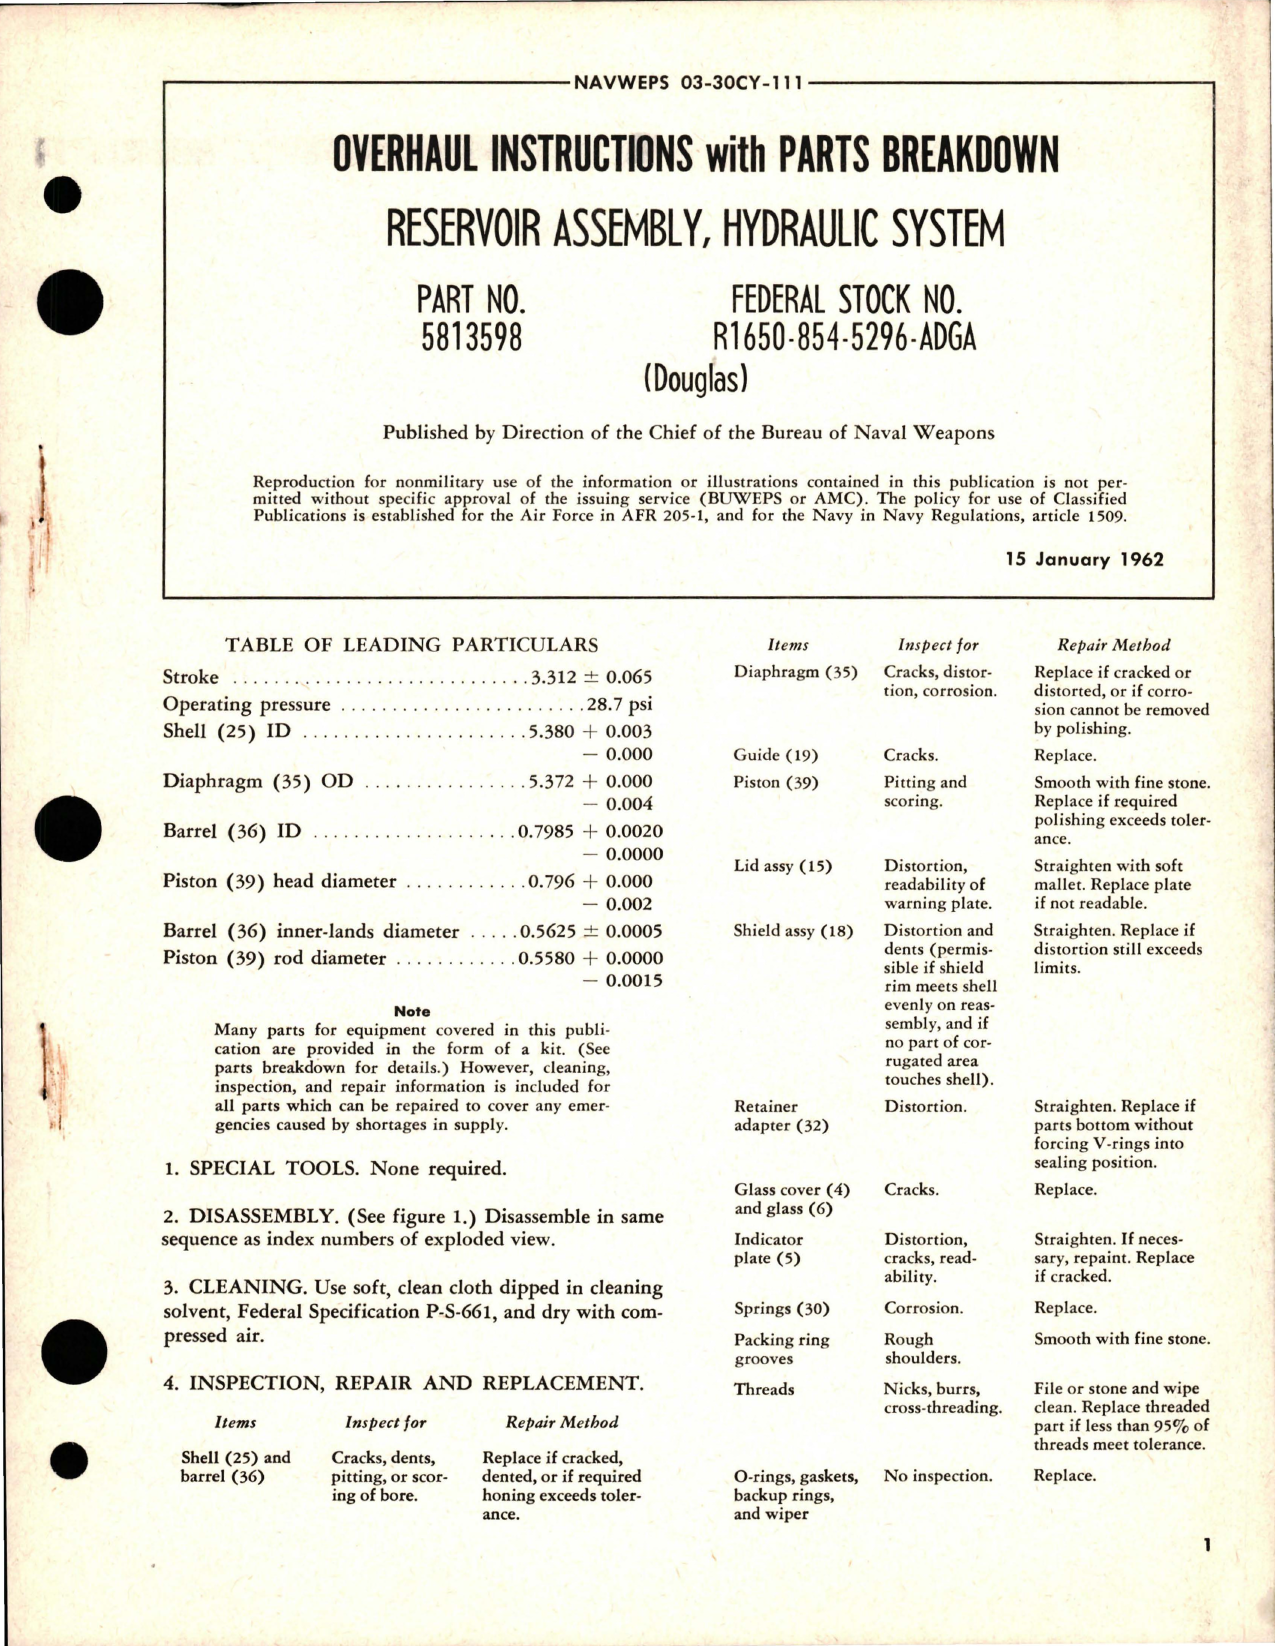 Sample page 1 from AirCorps Library document: Overhaul Instructions with Parts for Hydraulic System Reservoir Assembly - Part 5813598